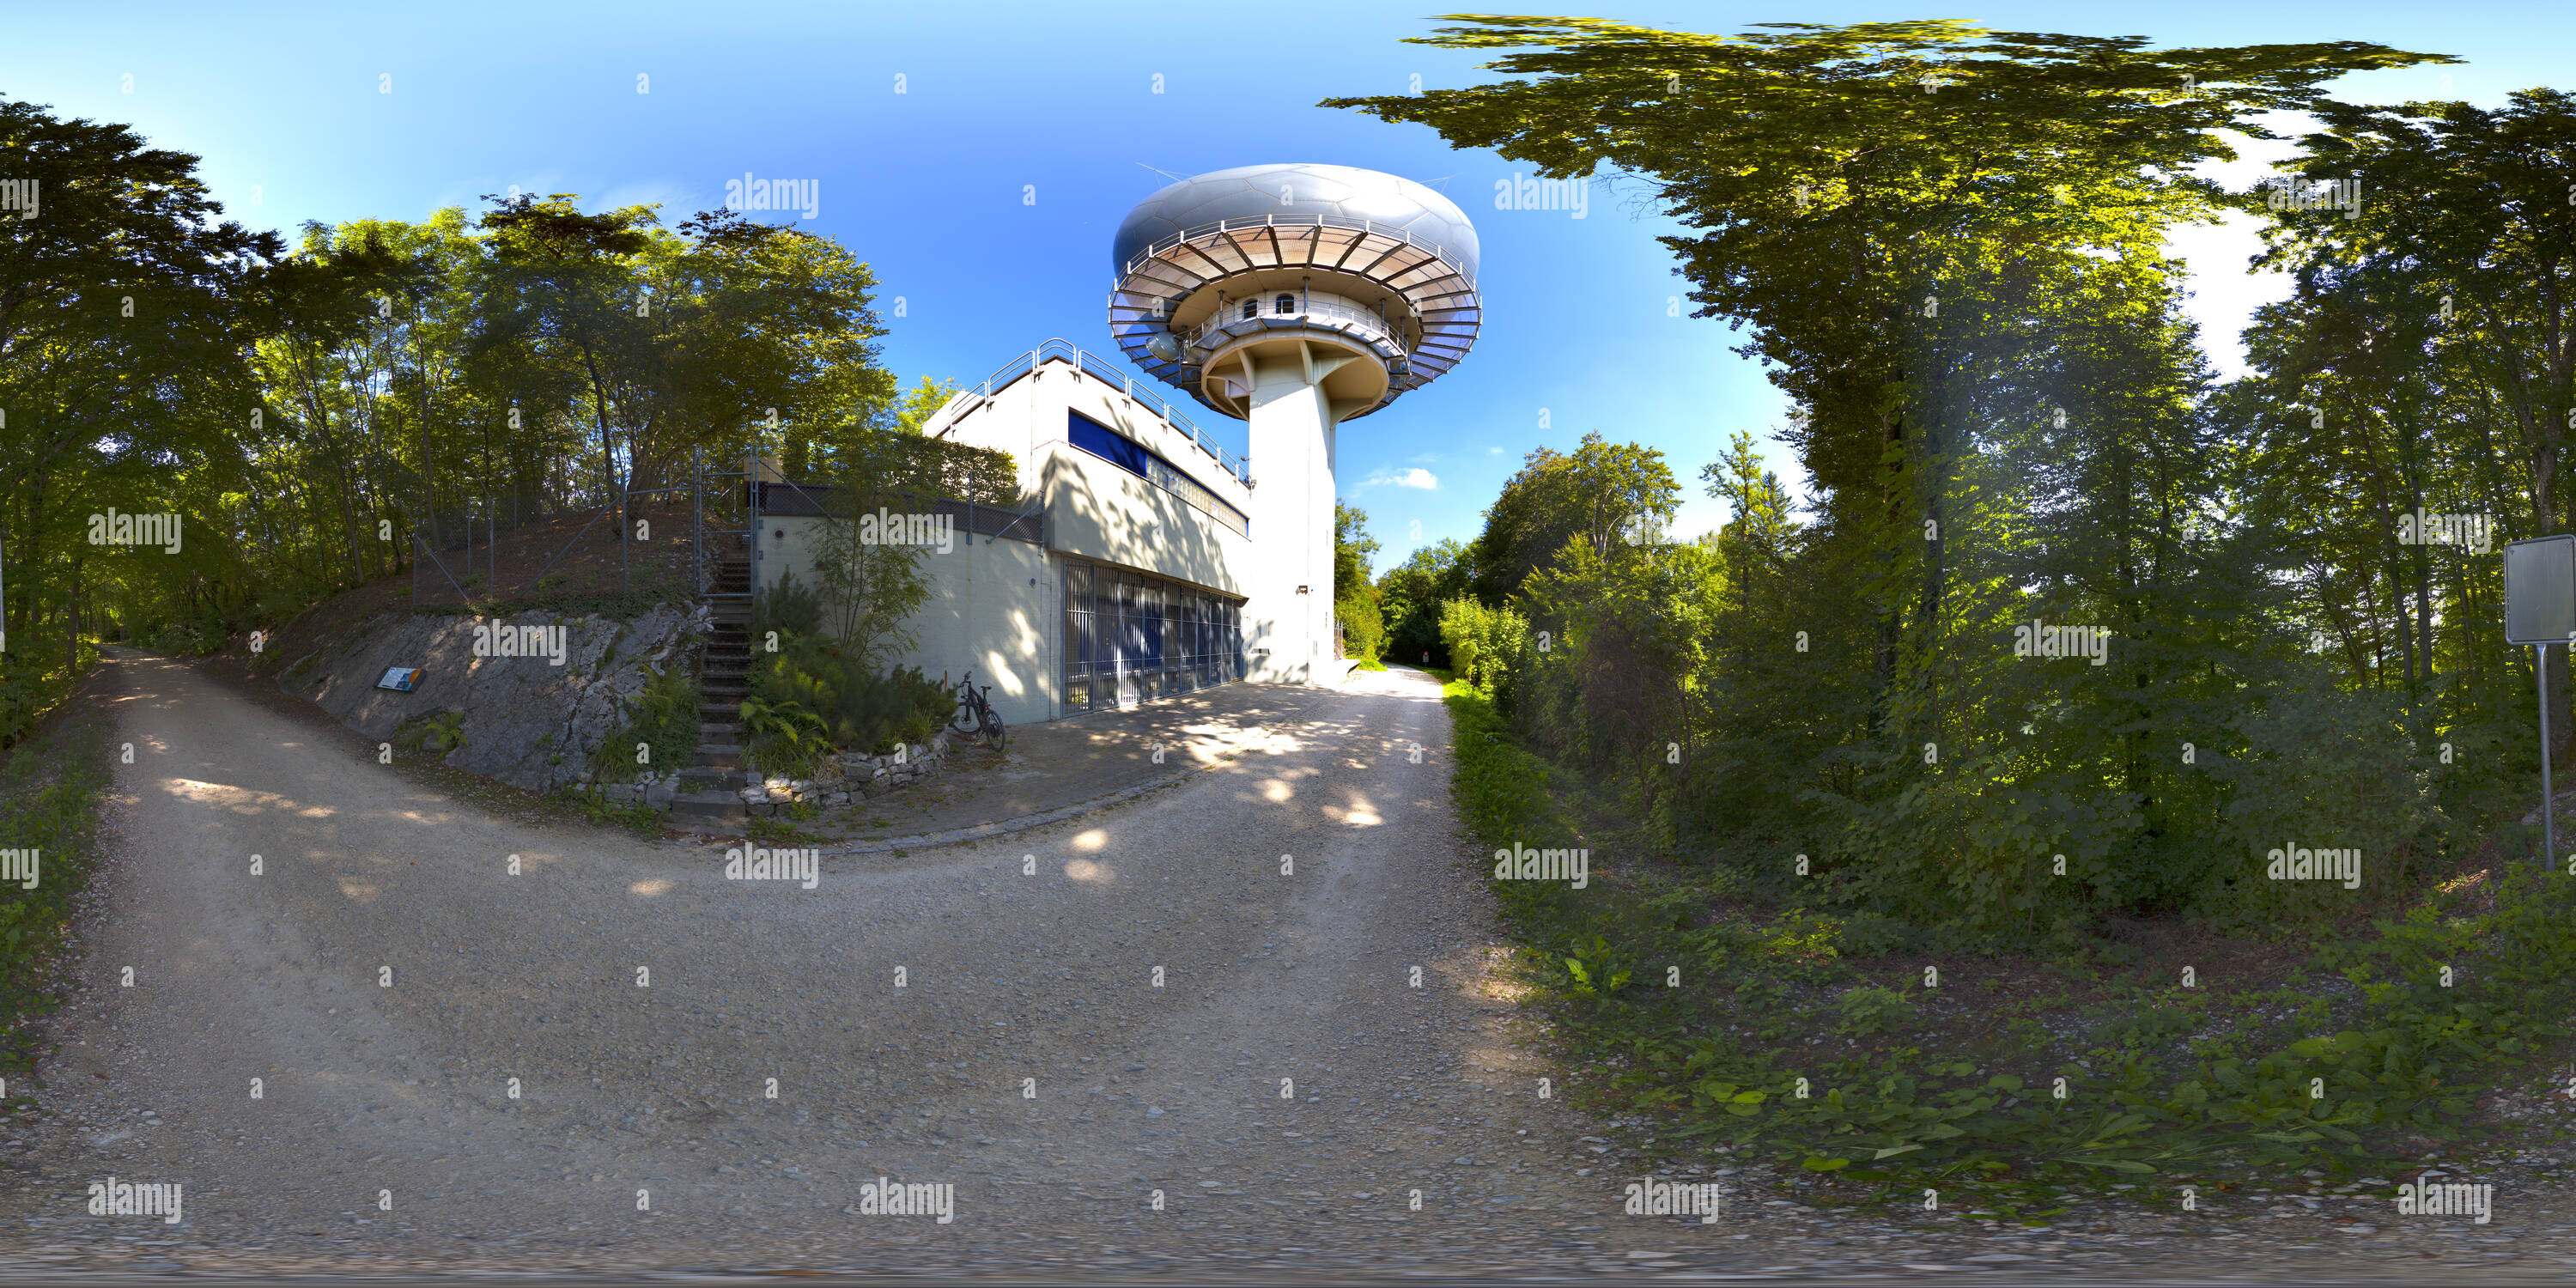 360 degree panoramic view of Skyguide Laegern